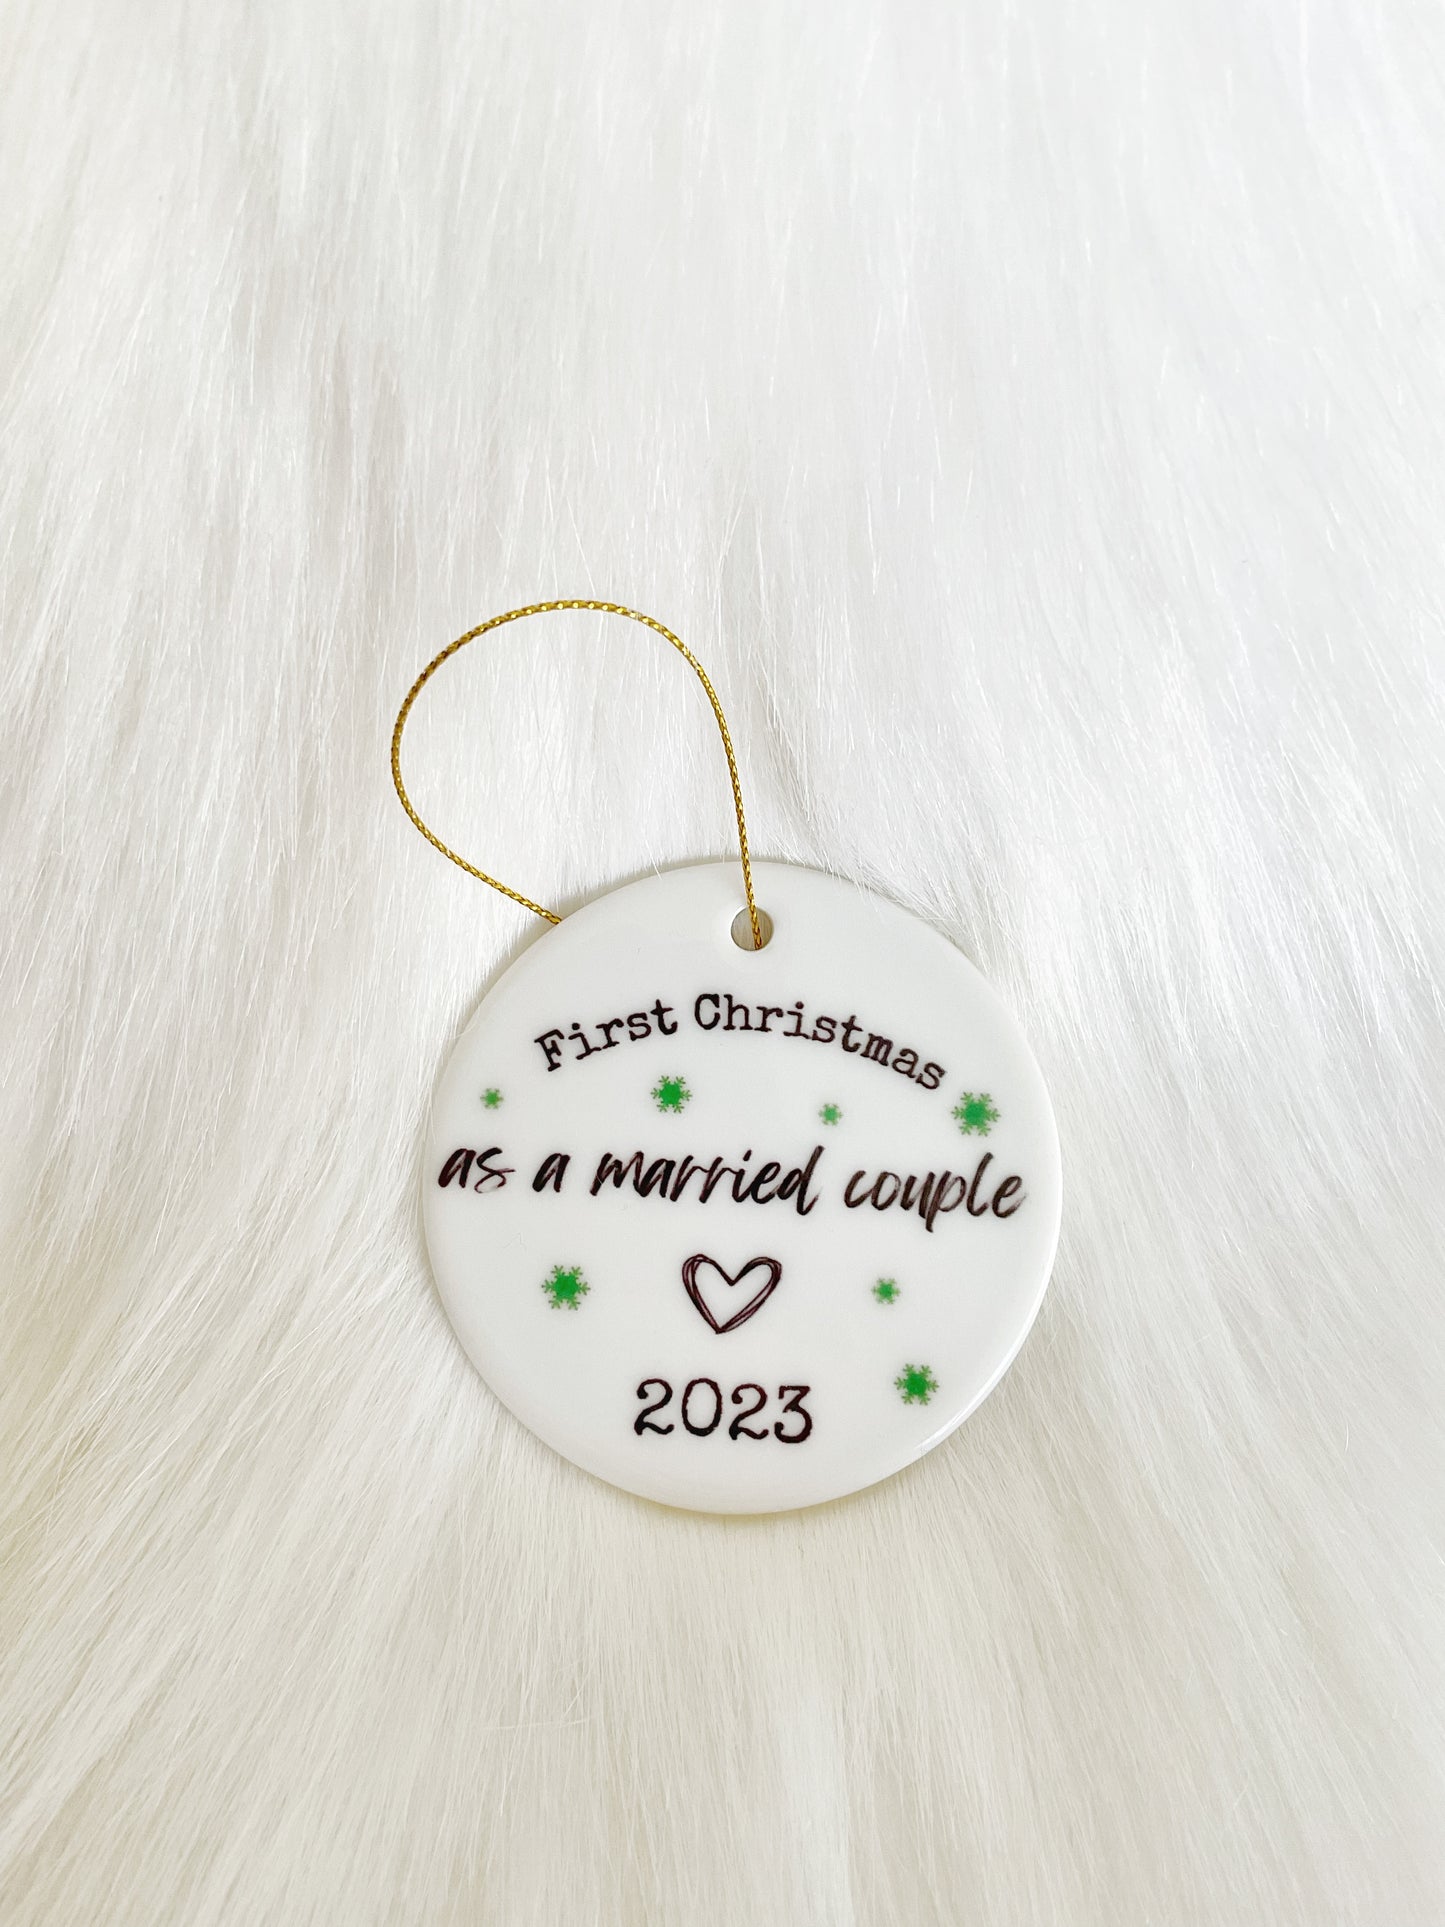 Our first Christmas as a married couple - Ceramic decoration